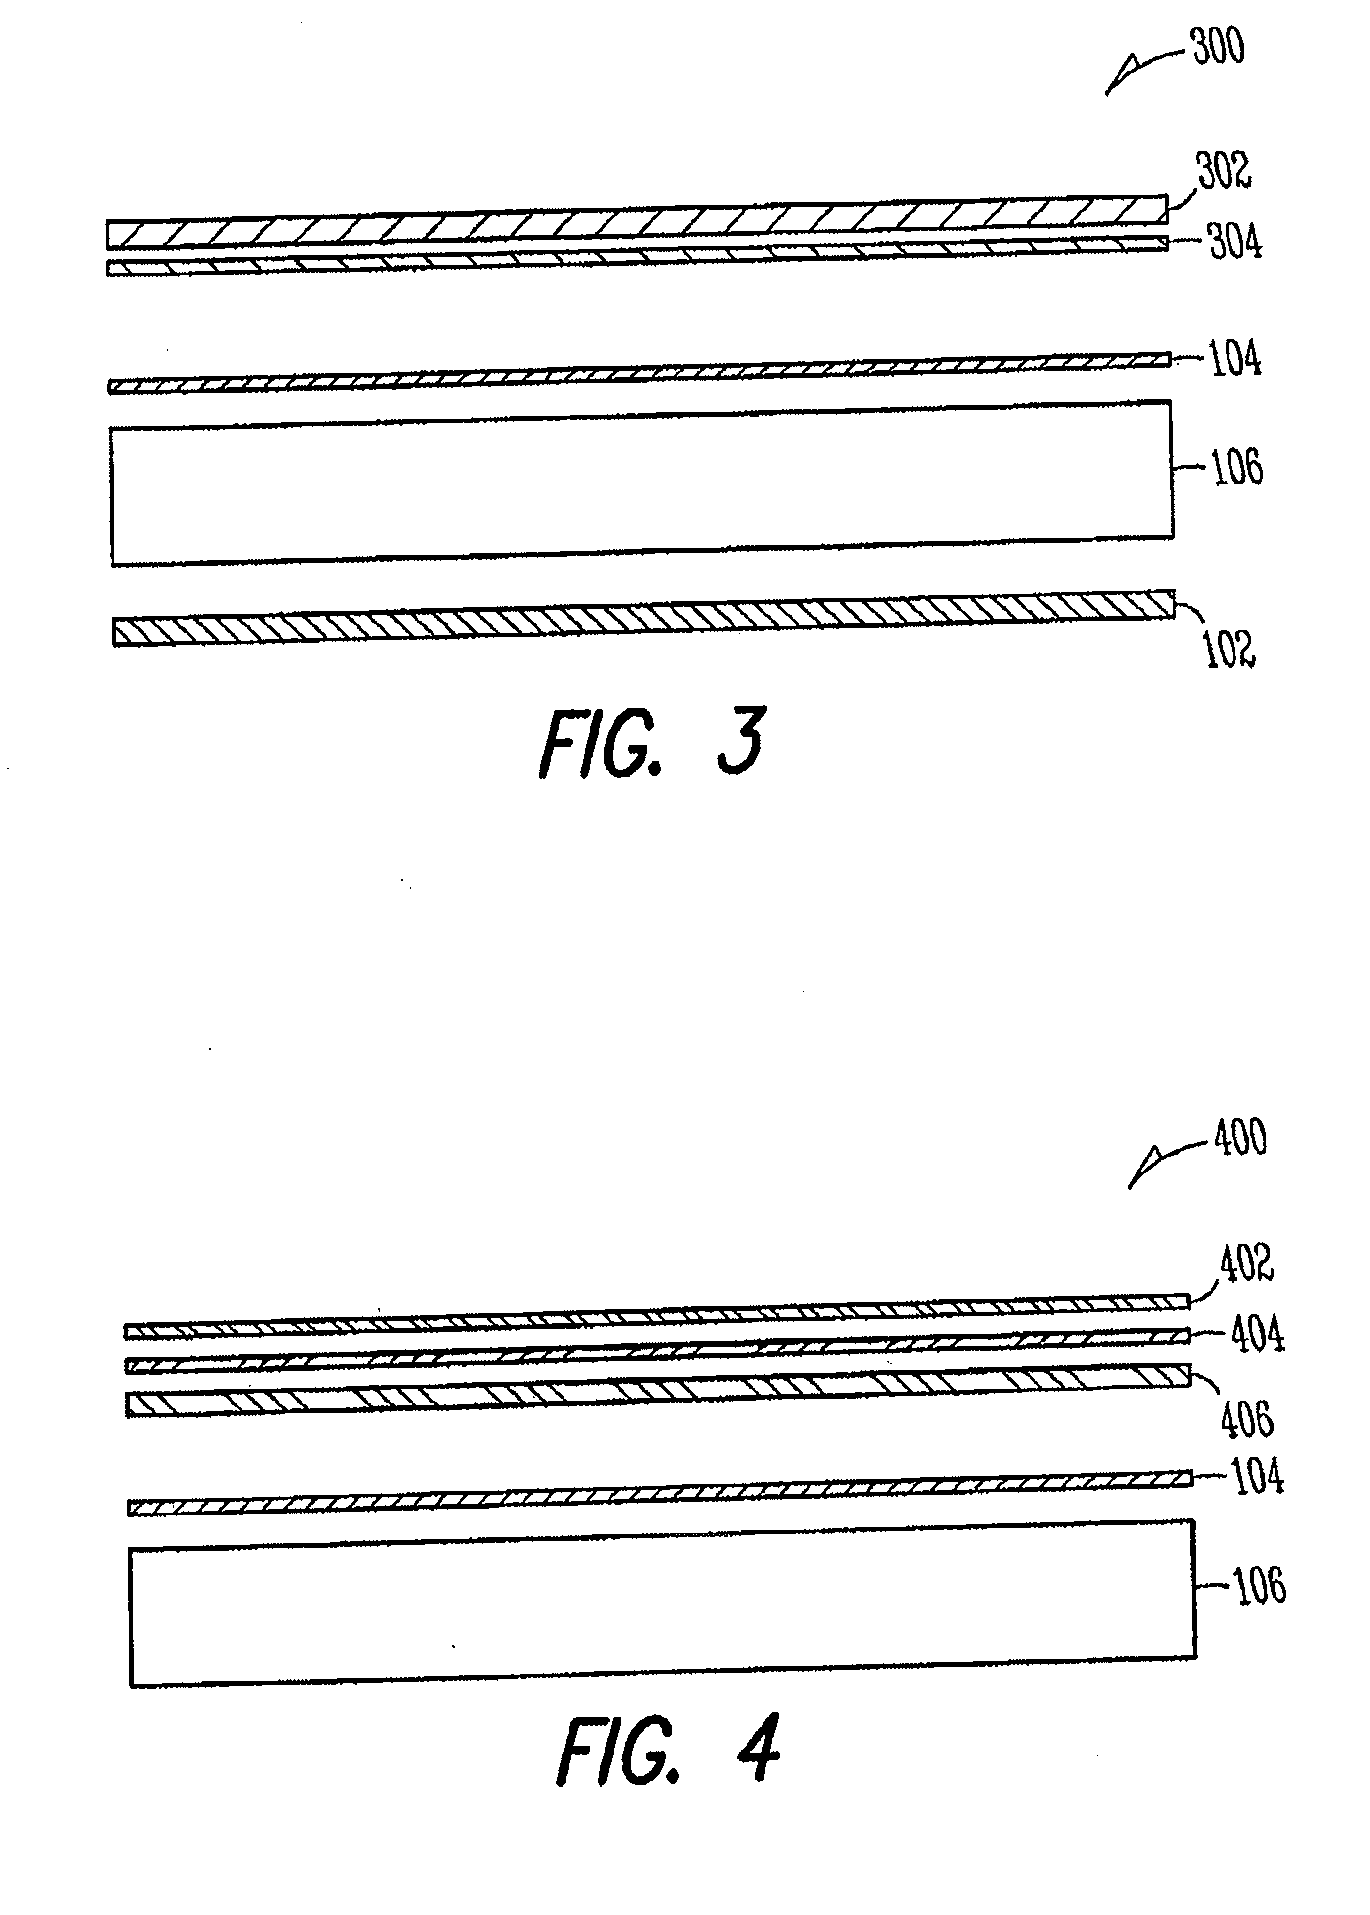 Cellulosic biolaminate composite assembly and related methods